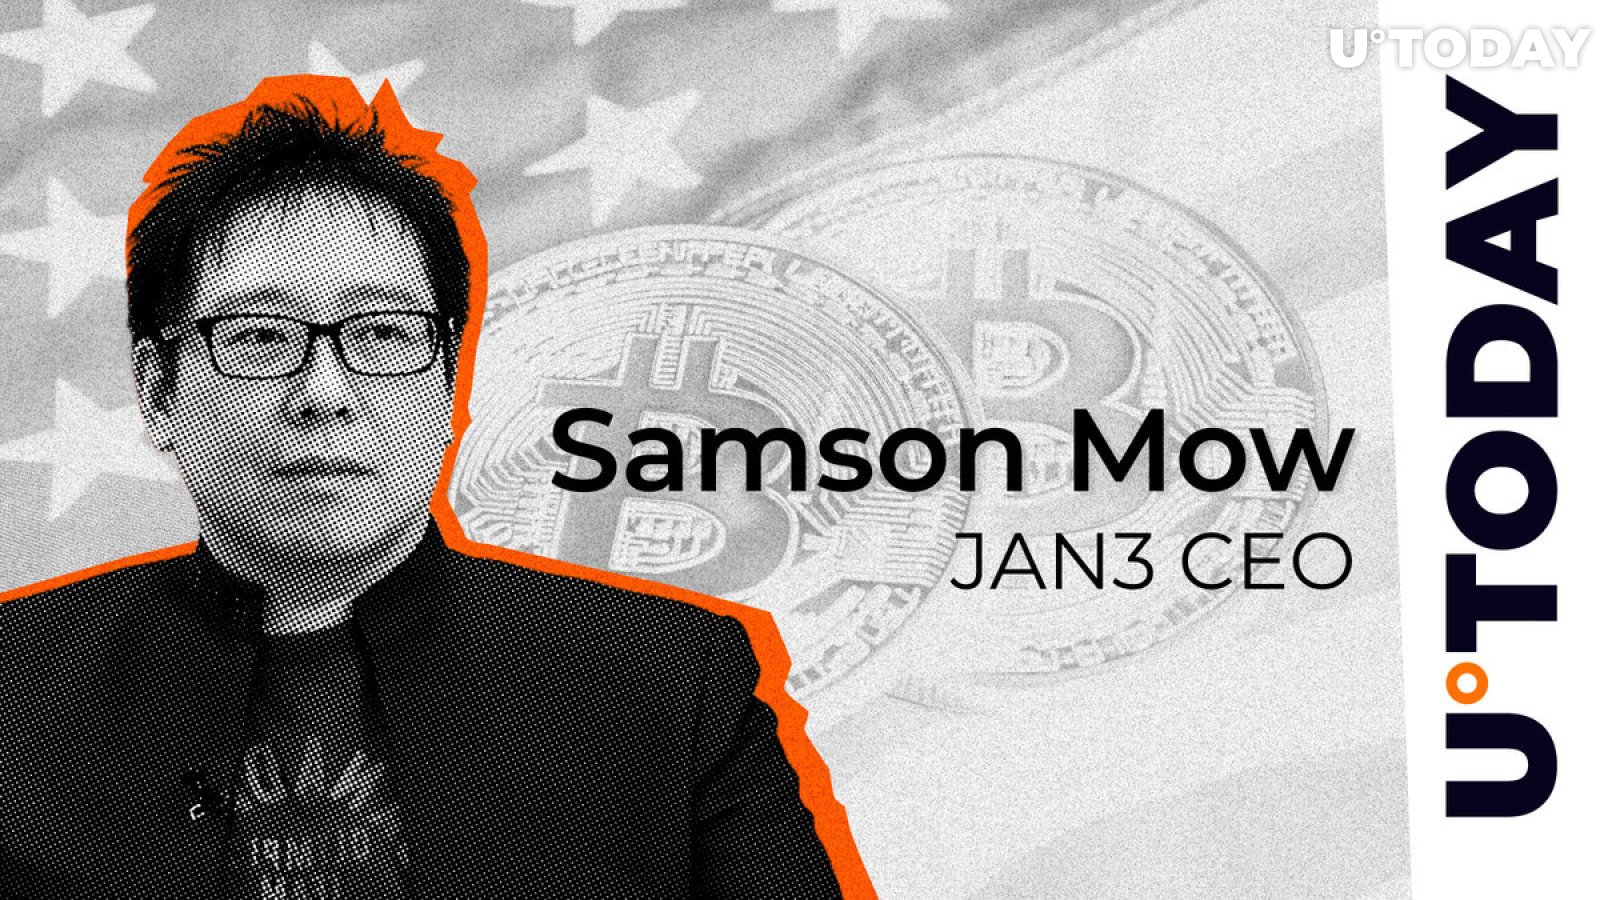 Crucial US Bitcoin Reserves Statement Made by Samson Mow